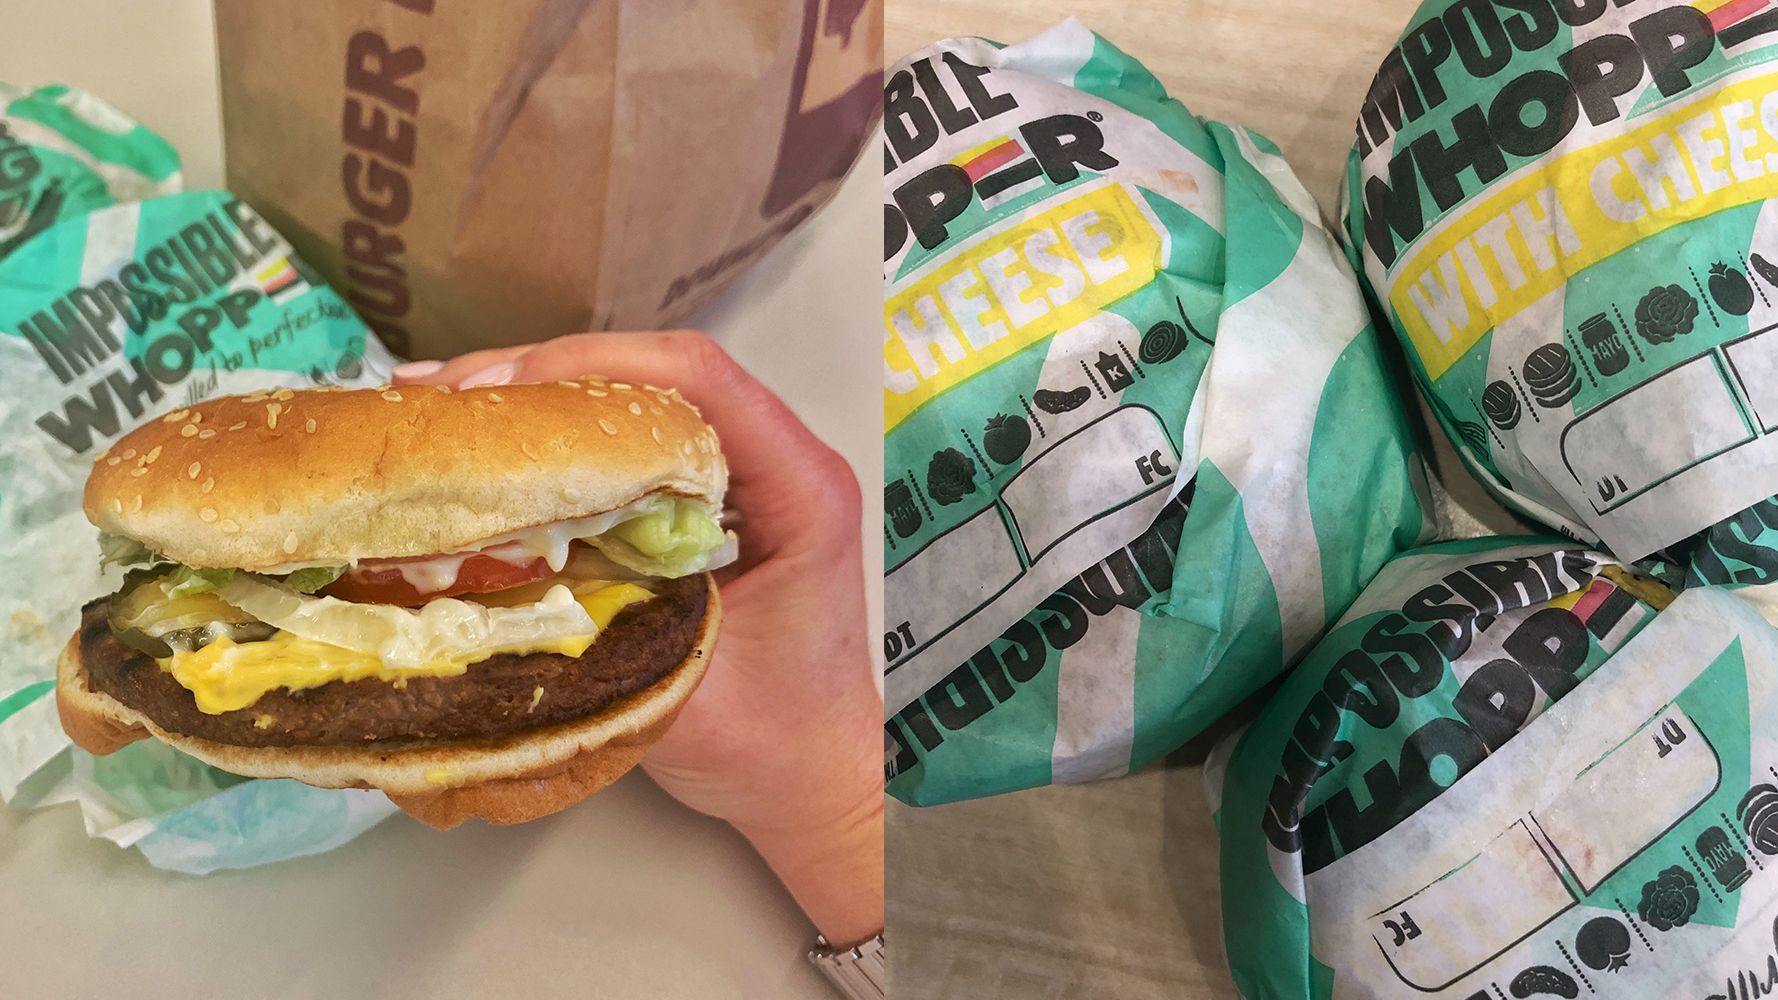 Burger King's Impossible Whopper Taste Test: It's The Perfect Meat